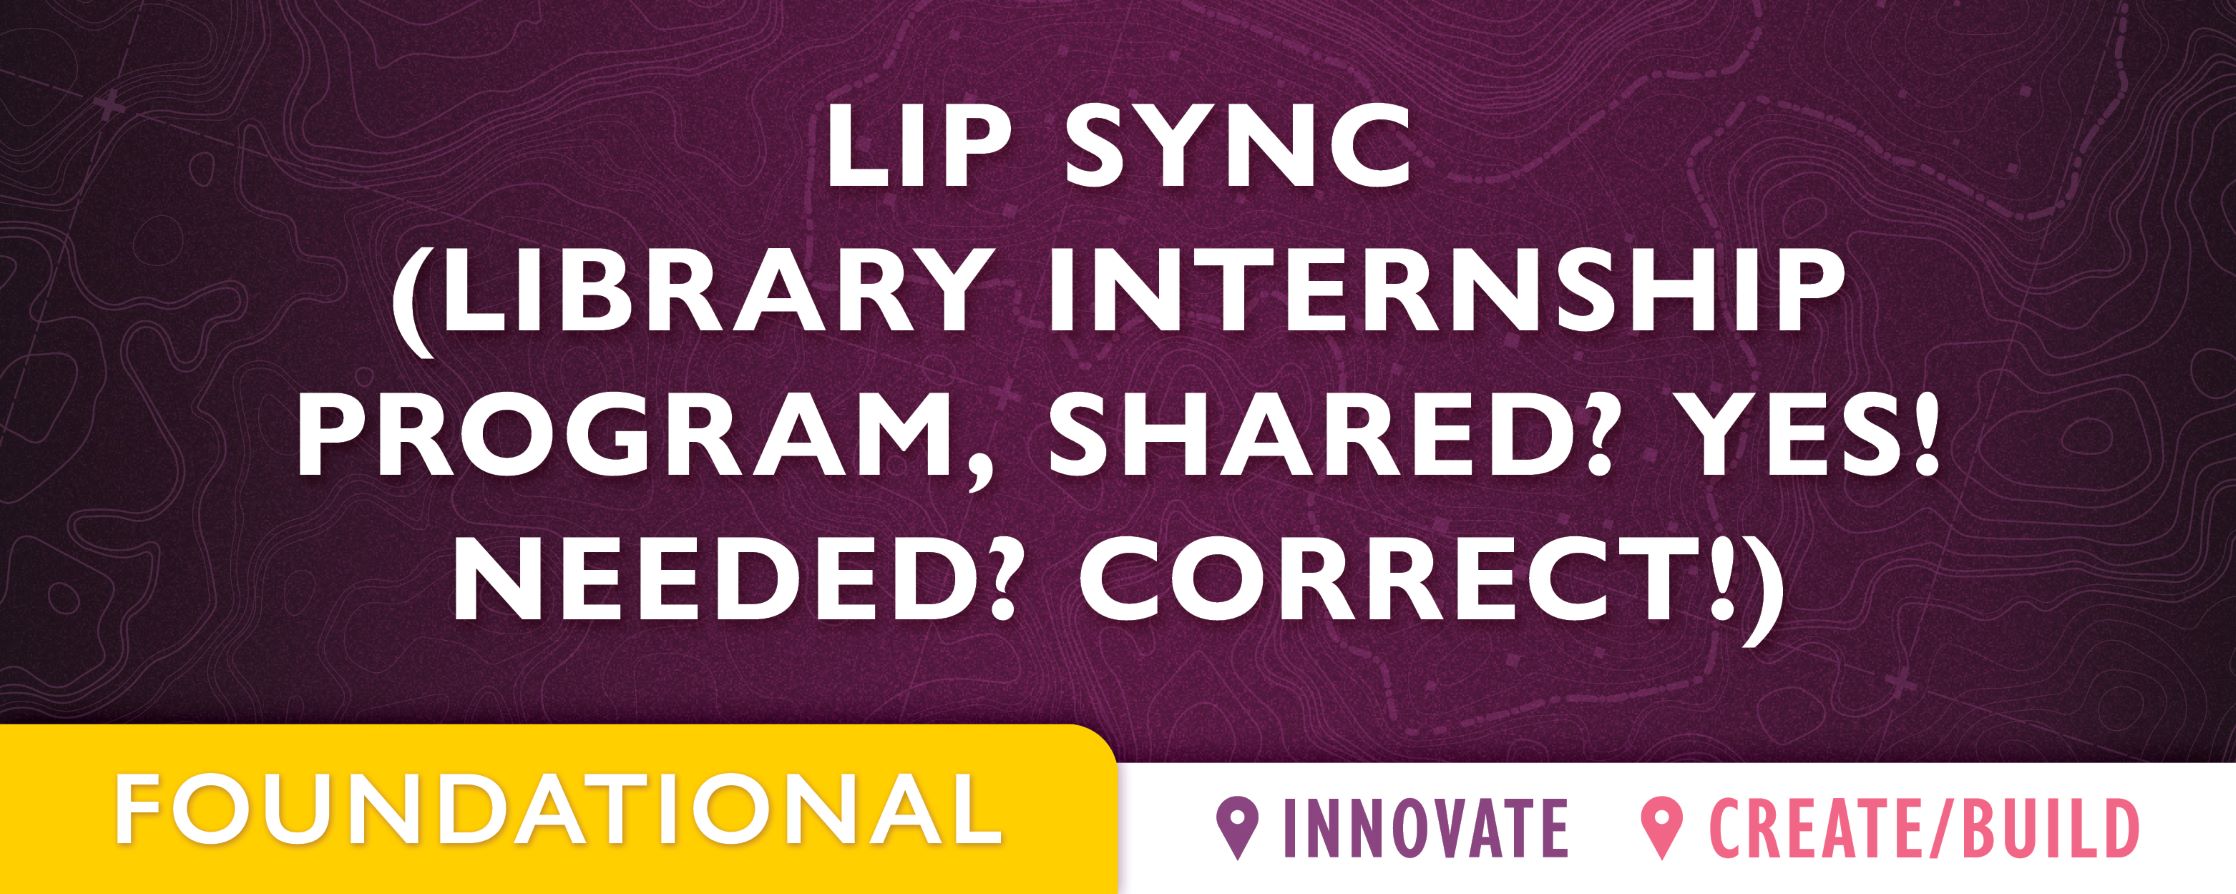 purple background with text:LIP SYNC (Library Internship Program, Shared? Yes! Needed? Correct!)